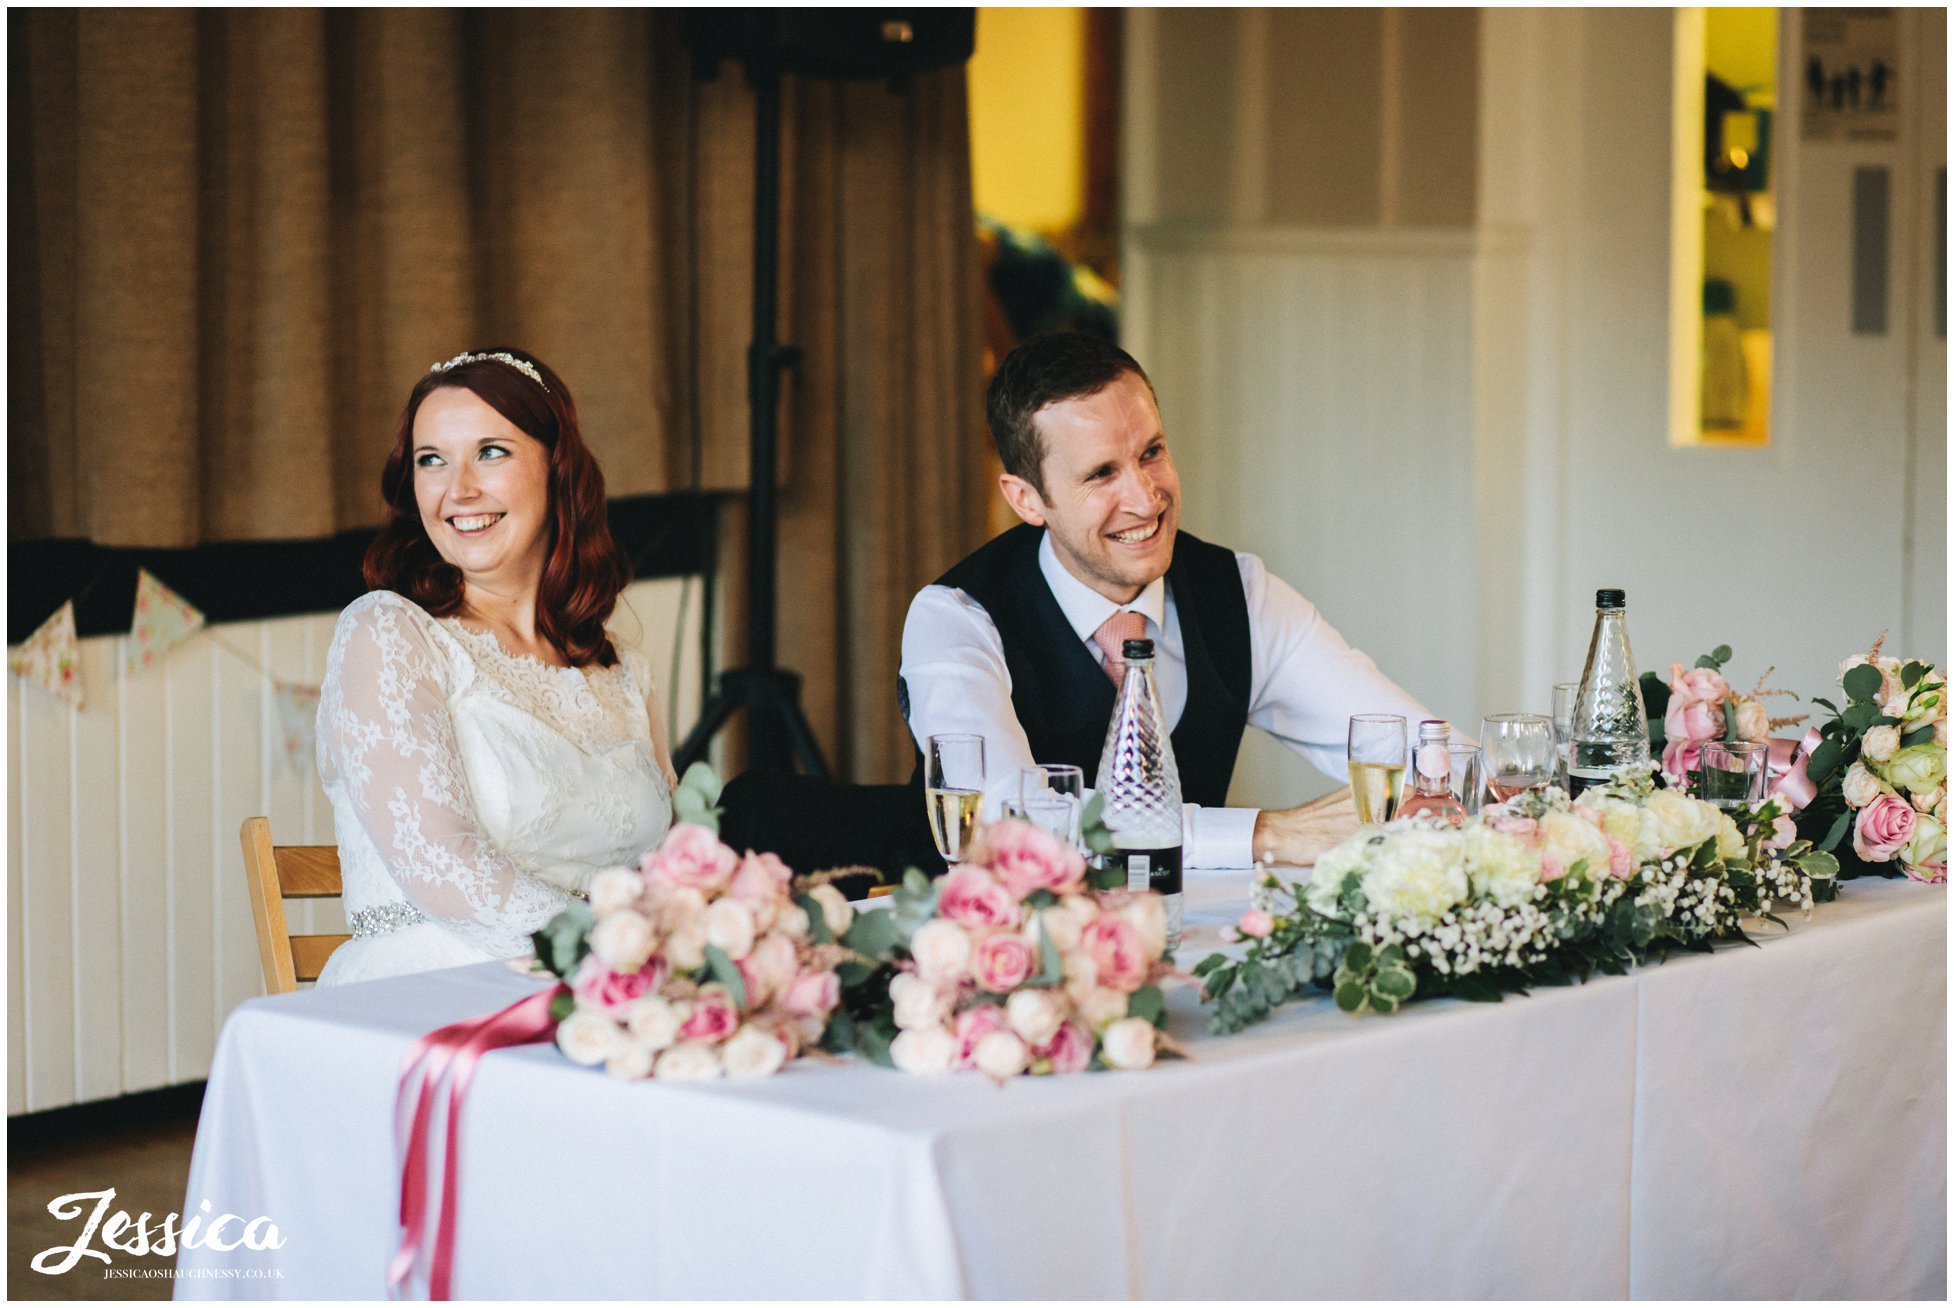 the new couple laugh during their wedding speeches